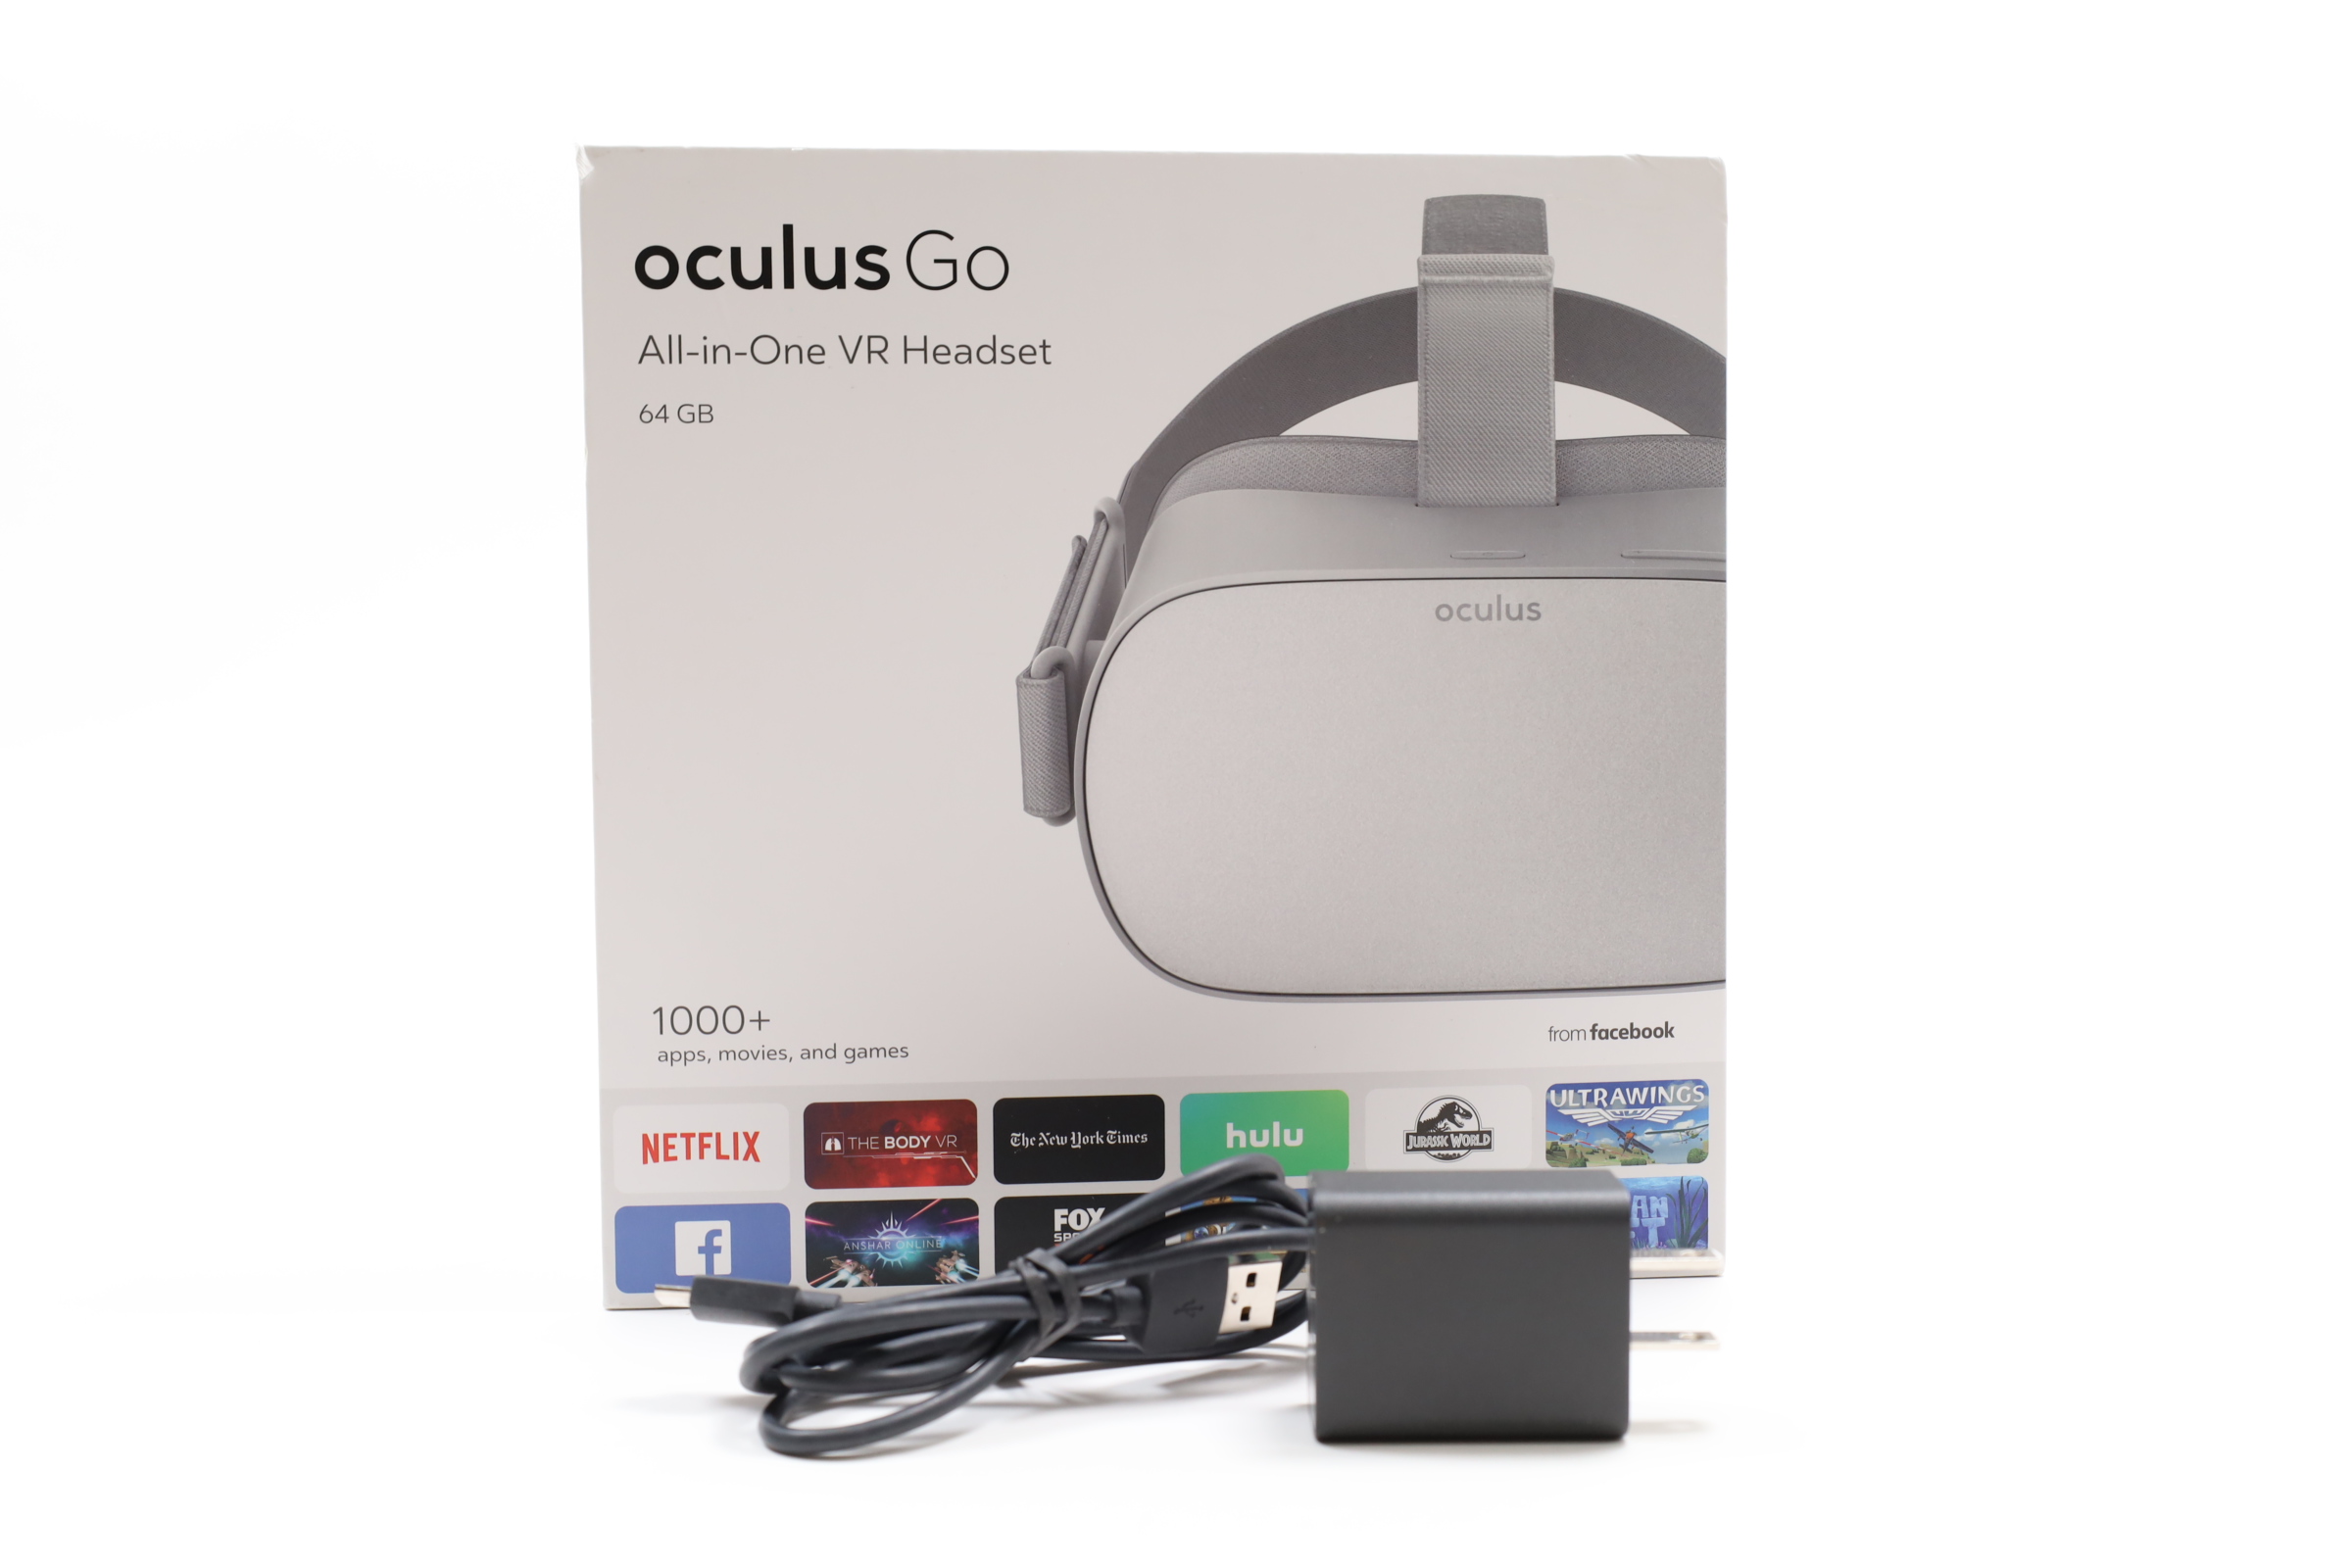 Oculus Go 64GB All-in-One Virtual Reality Headset